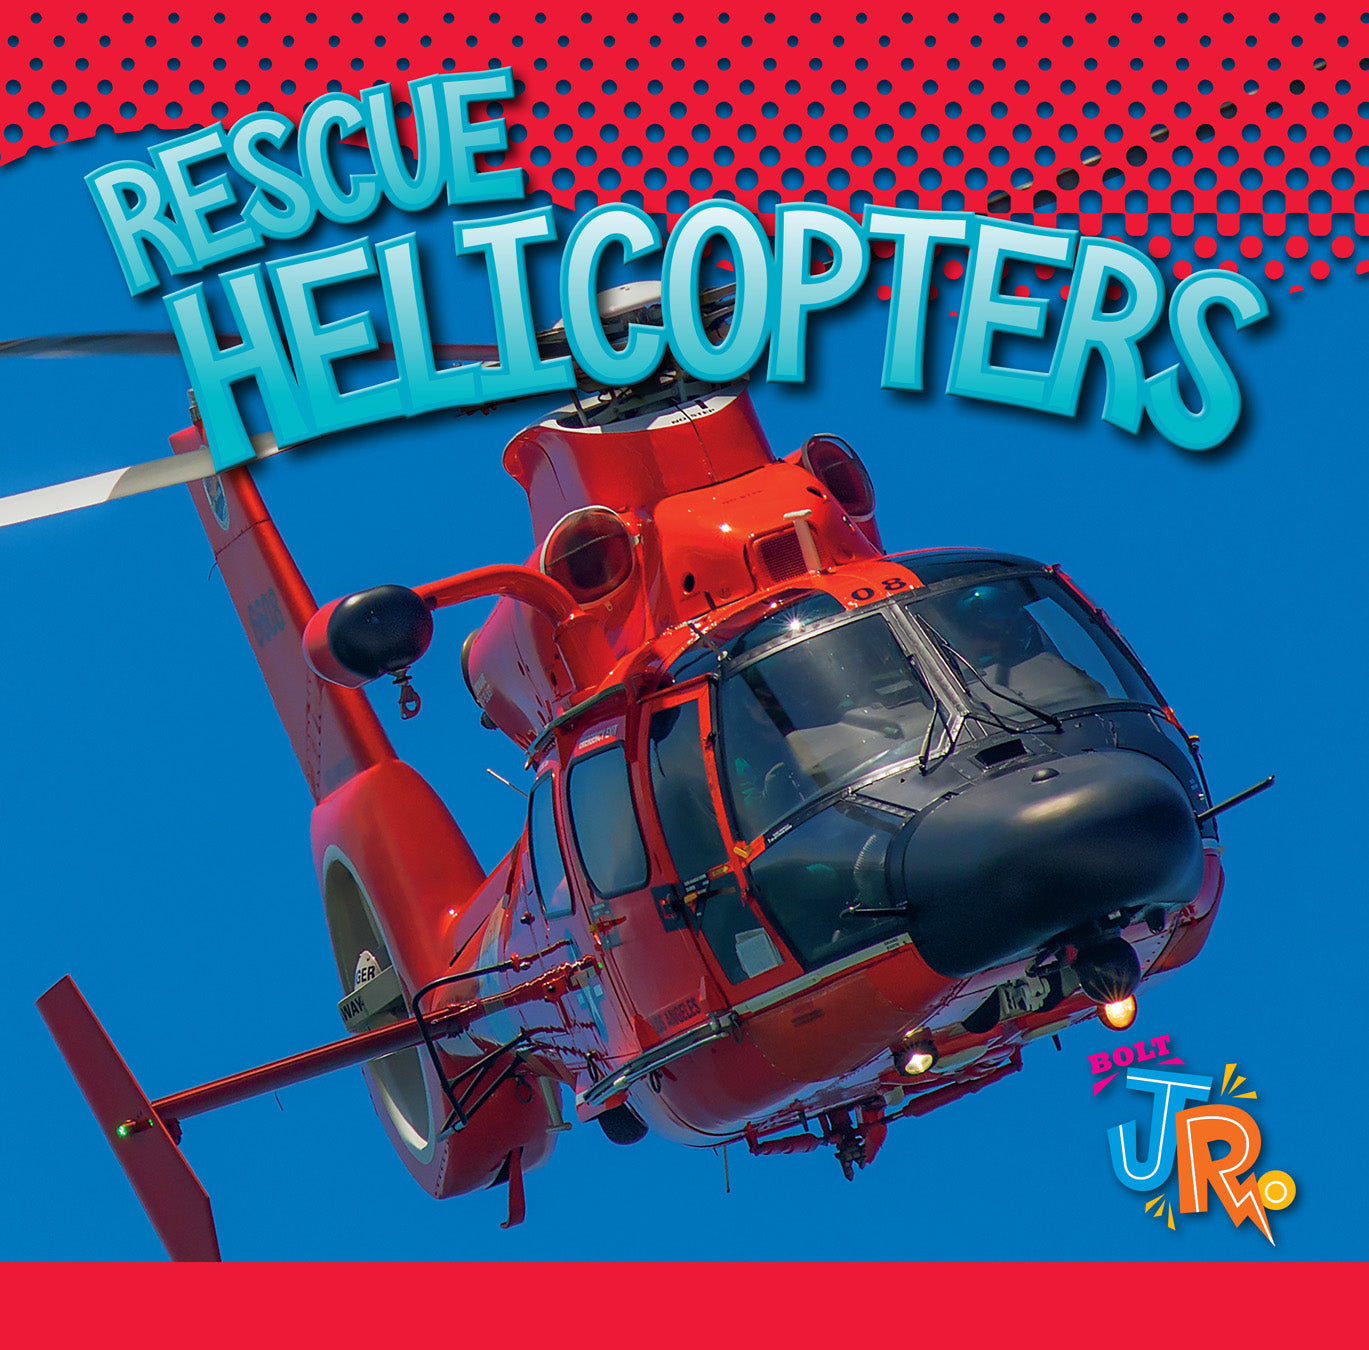 Emergency Vehicles: Rescue Helicopters